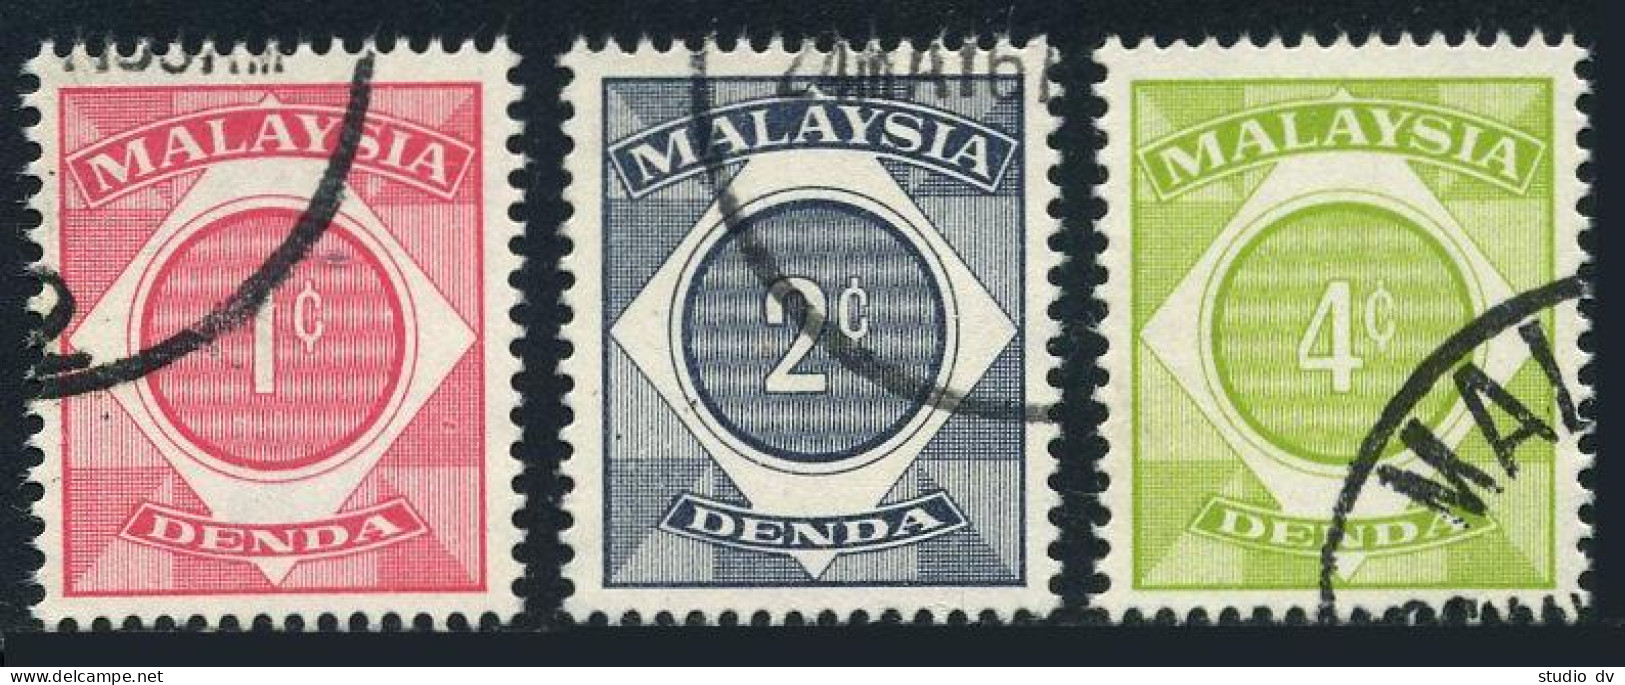 Malaysia J1-J3,CTO.Michel P8-P10. Postage Due Stamps,1966.Numeral. - Malaysia (1964-...)